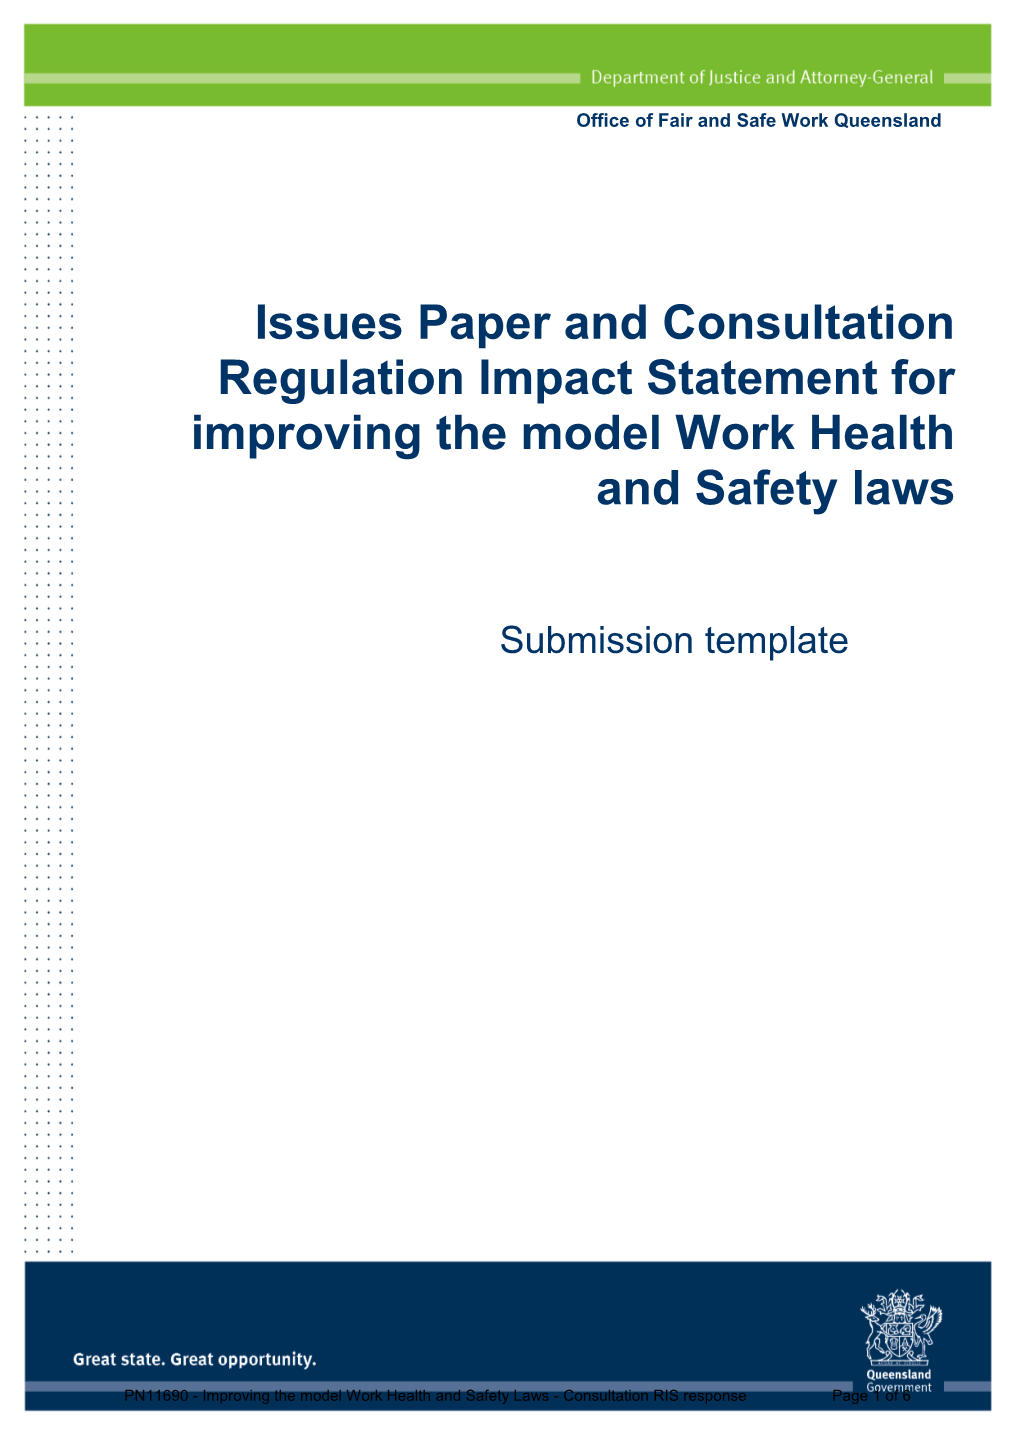 Issues Paper and Consultation Regulation Impact Statement for Improving the Model Work